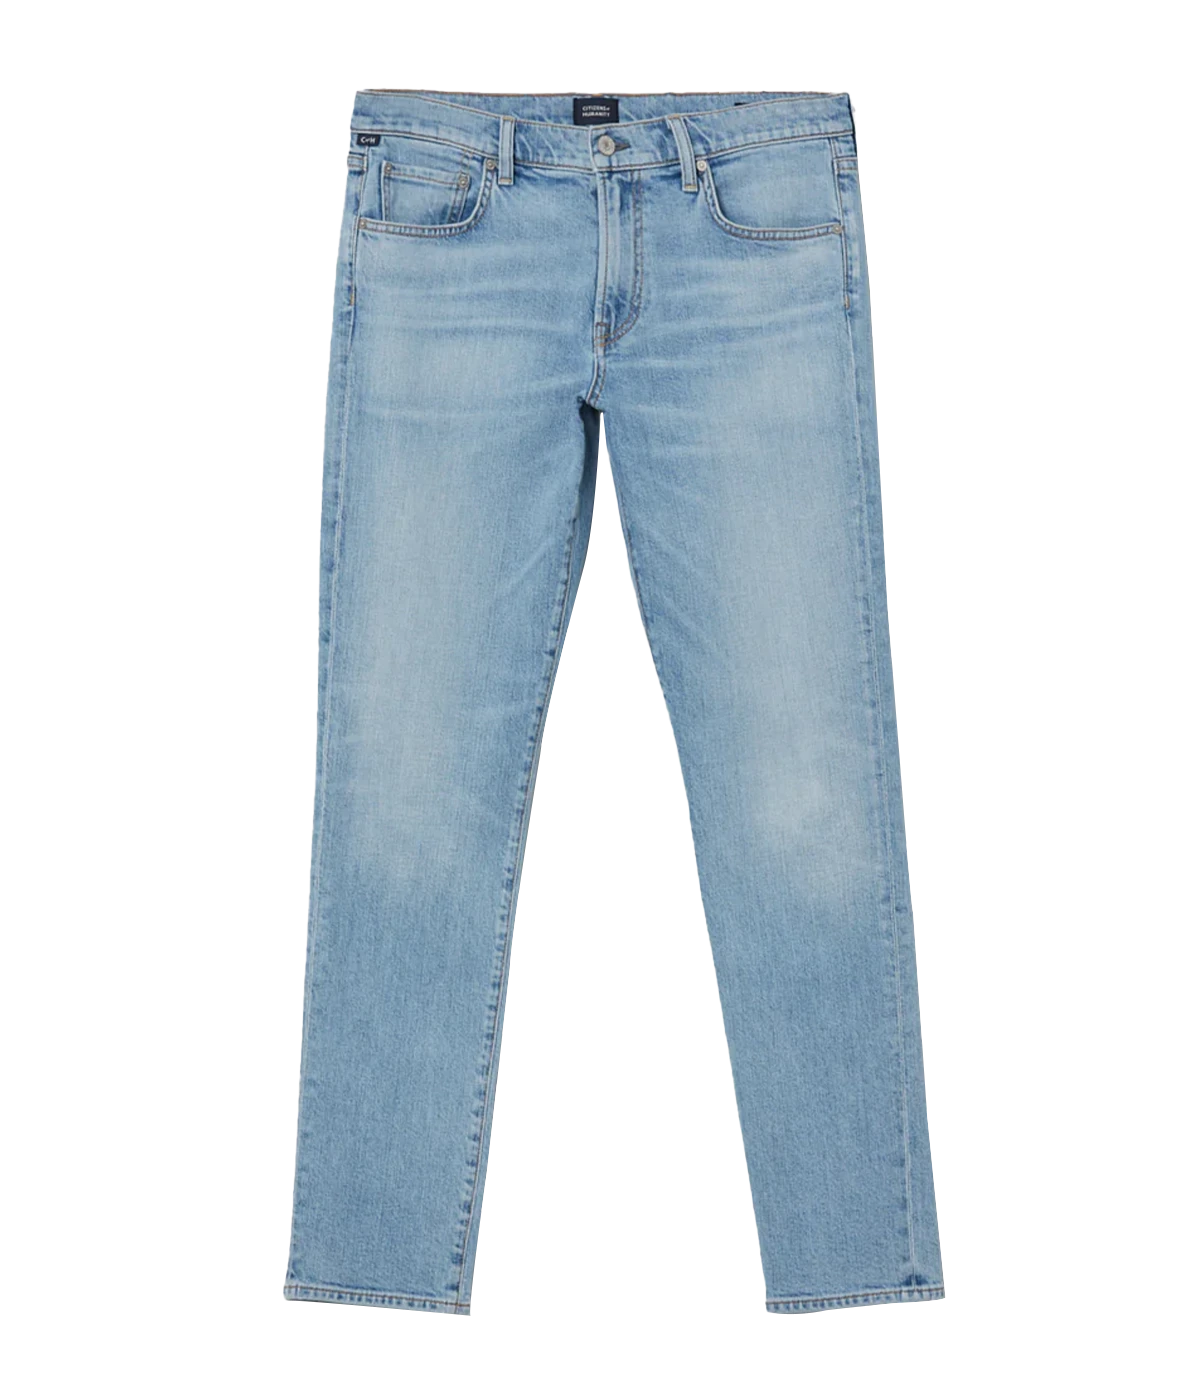 Light indigo jean cut from heavyweight stretch denim. Fits fuller in the thighs and tapers to the ankle, Wash and wear for everyday comfort.